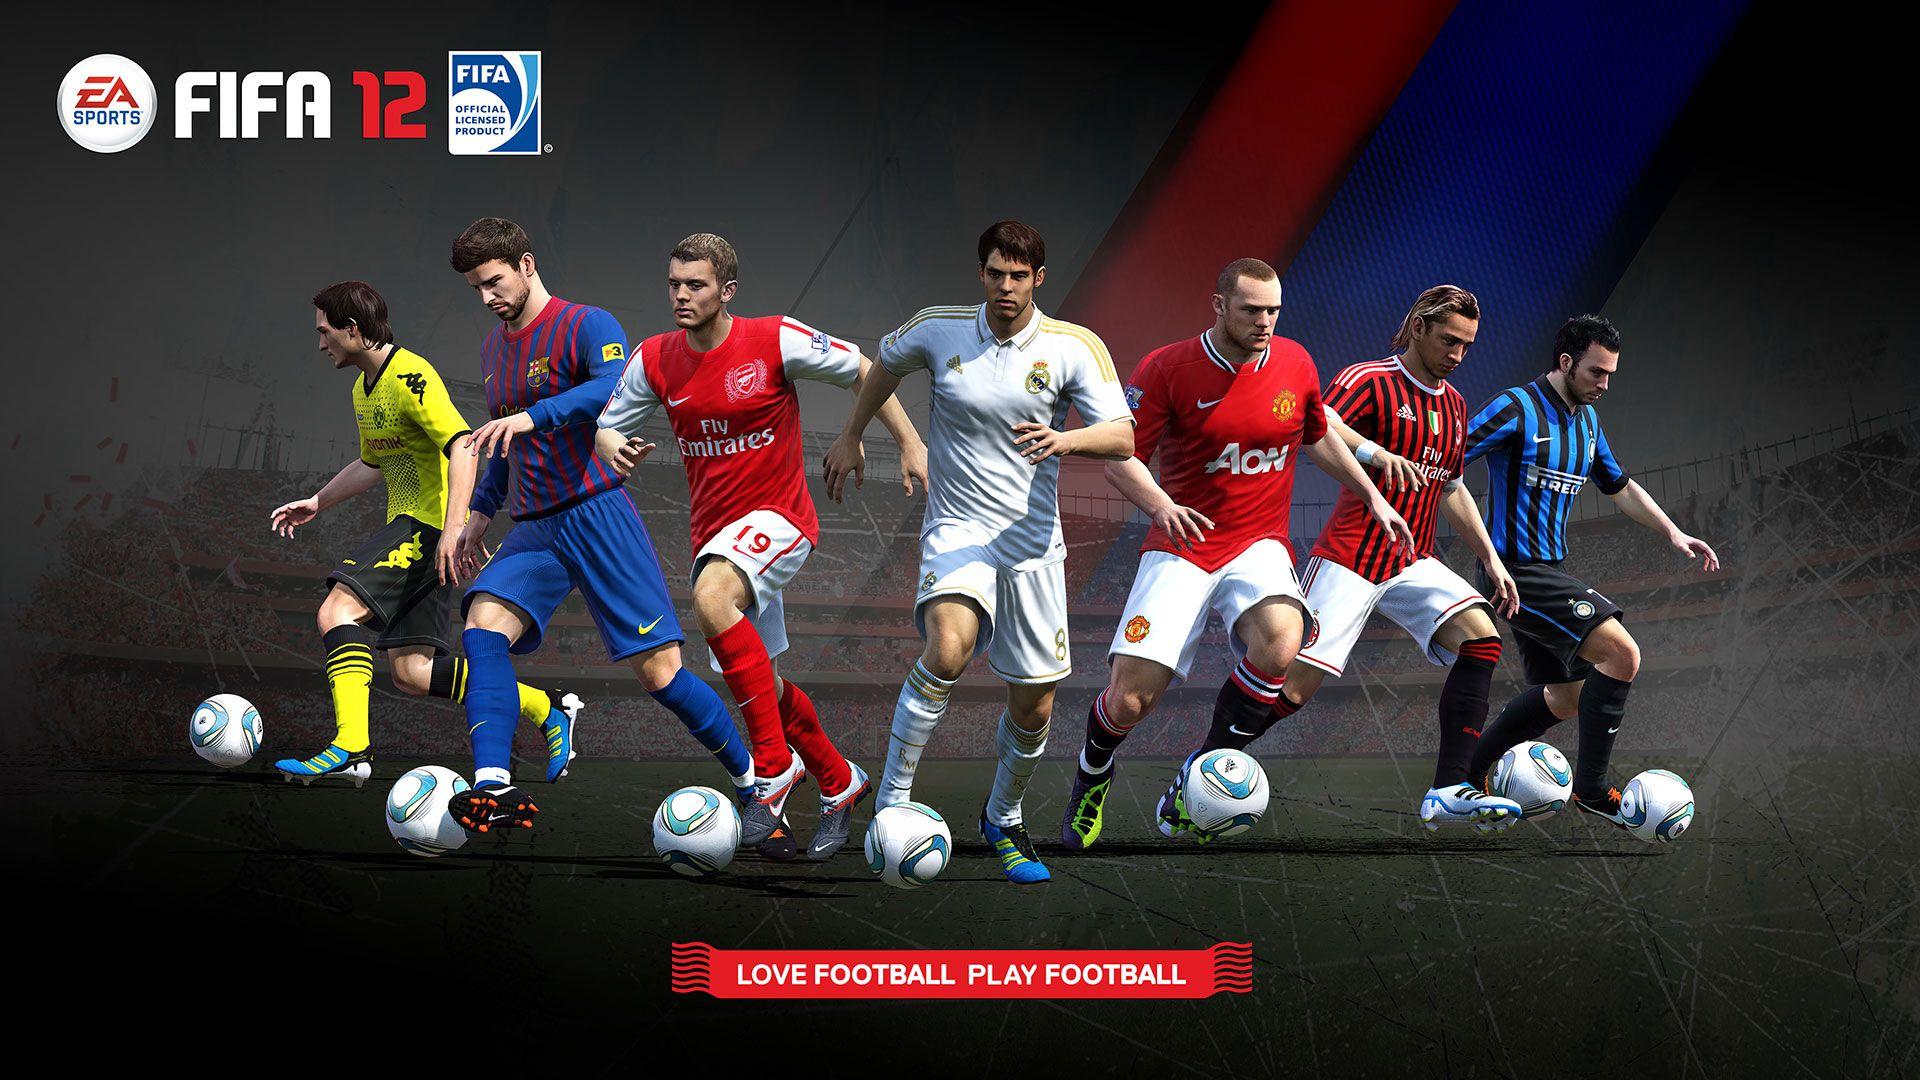 FIFA 12 Full HD Wallpaper and Background Imagex1080